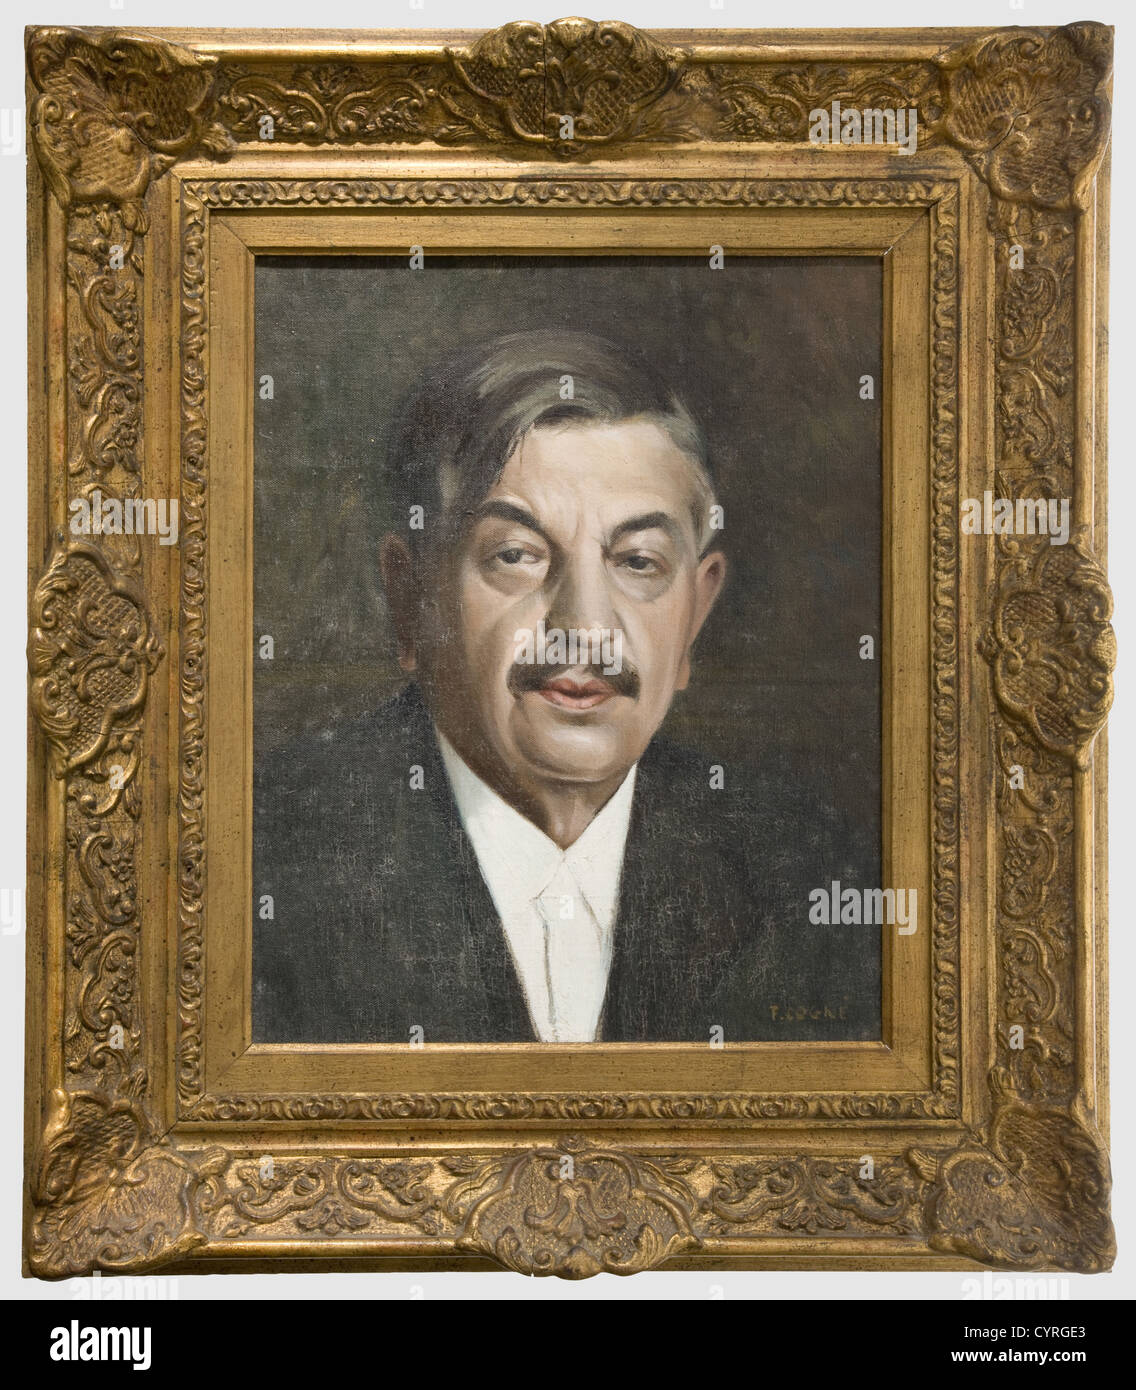 Président Pierre Laval (1883 - 1945), a portrait, Vichy France Oil on canvas, signed on the lower right F. COGNÉ. Laval showed in dark suit, white shirt and his famous tie. The canvas craquelured and stained. In gilt frame (63 x 55 cm). Picture size 41.5 x 33 cm. Pierre Laval was prime minister several times during the Third Republic. He was a minister and after Marshal Pétain the most important politician of the Vichy government, thus responsible for ist policy of collaboration with the German Reich. He was elected senator for the Seine (1927 - 1936) and for , Stock Photo